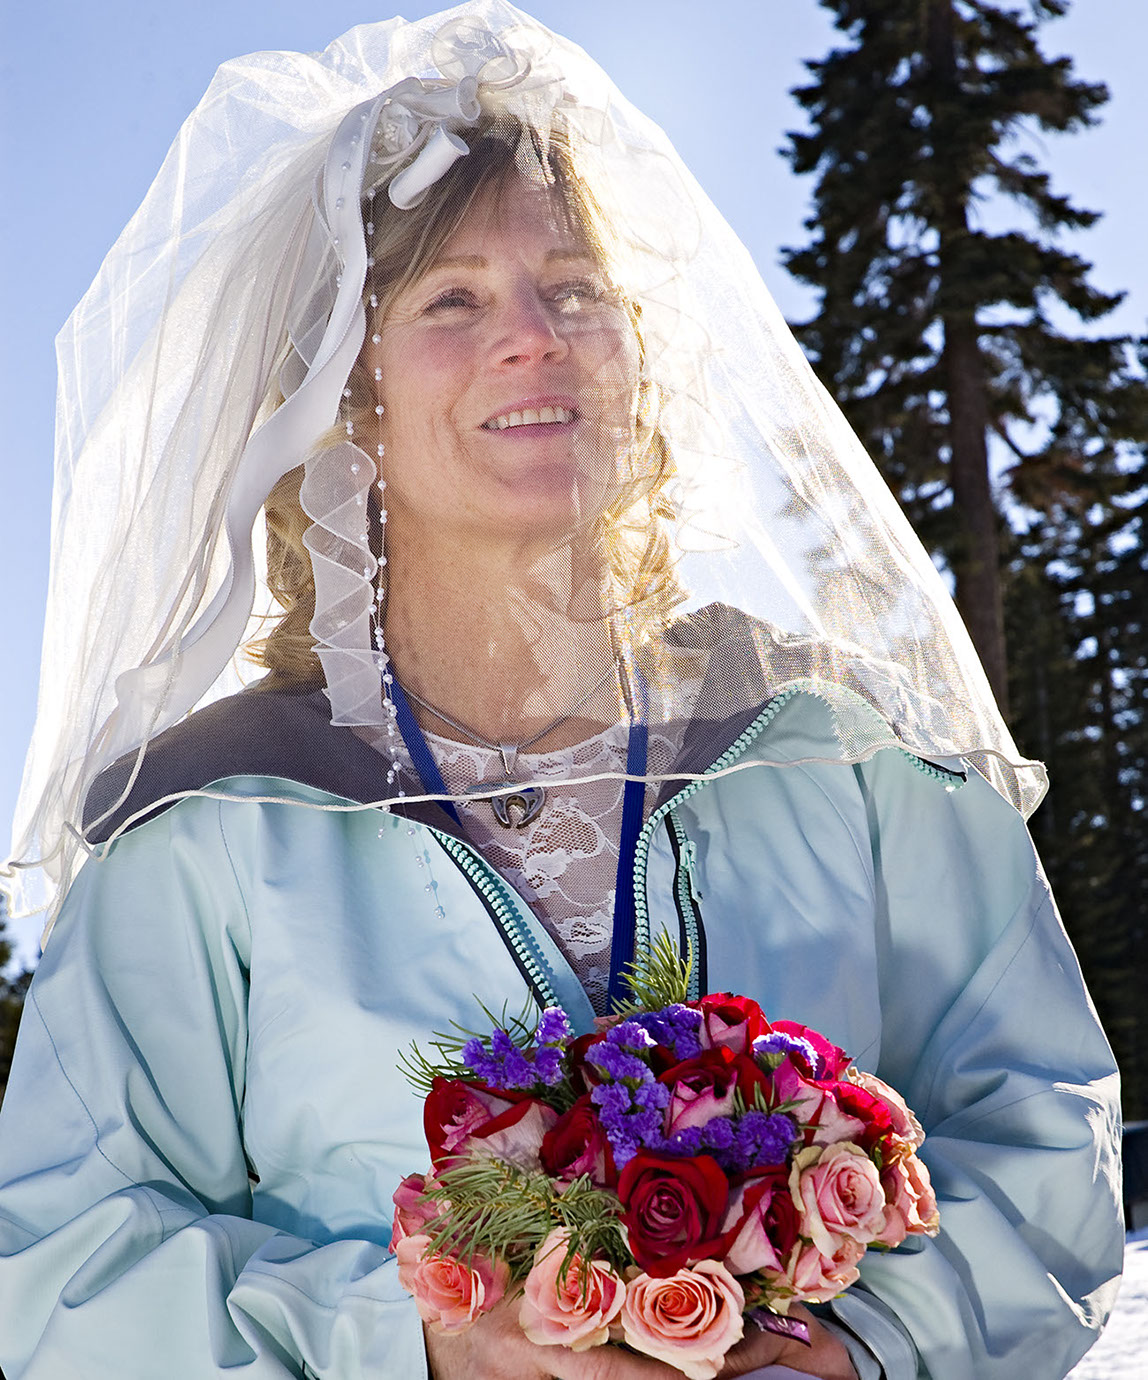 Boston Wedding Photographer Ron Richman photographs The smiling bride with flowers and sun light shining through her vail looking fantastic.